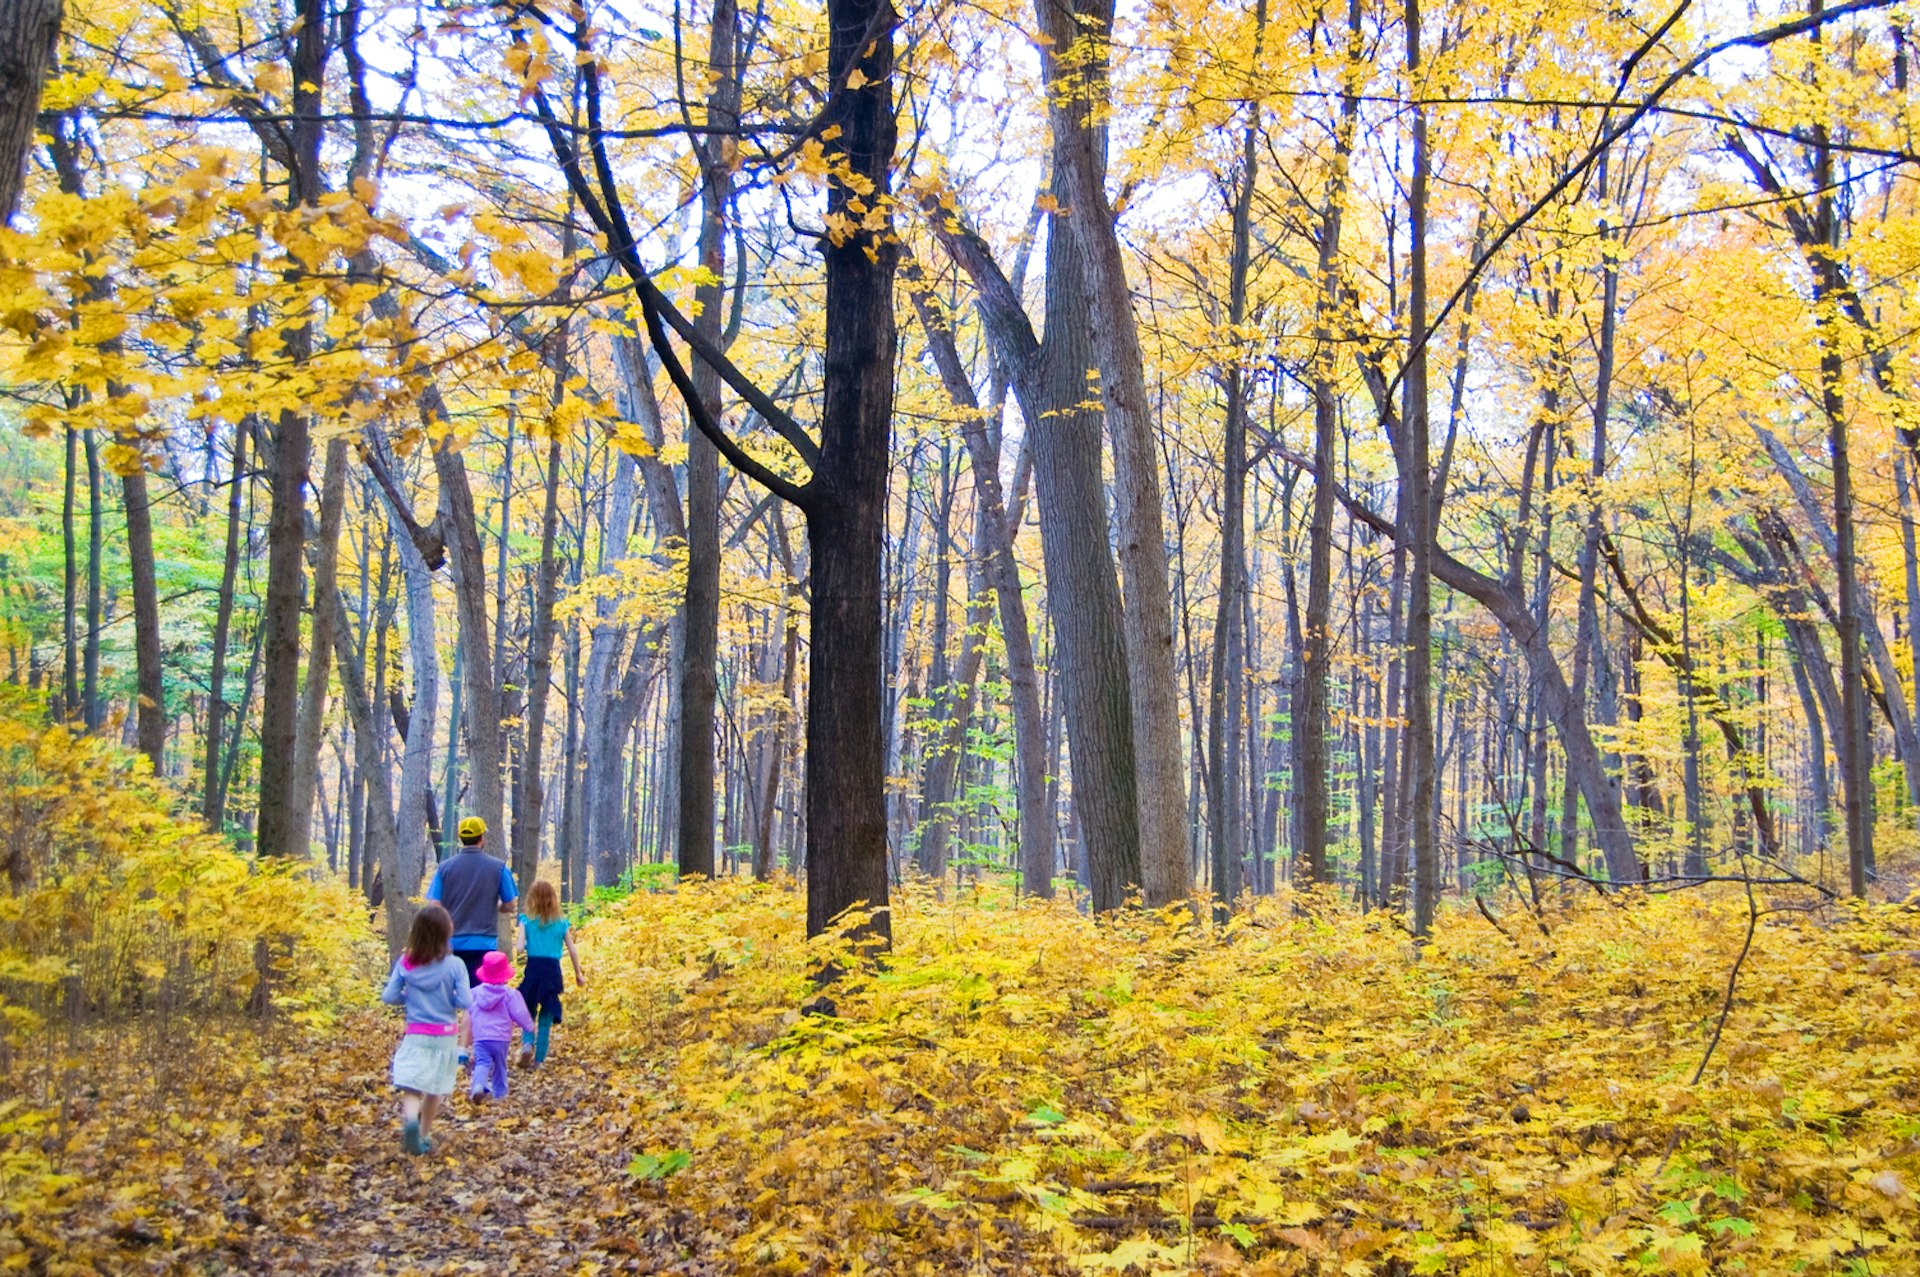 A family with young children follow a hiking trail through a wooded area in Wisconsin. All the leaves on the trees have turned yellow in the fall.